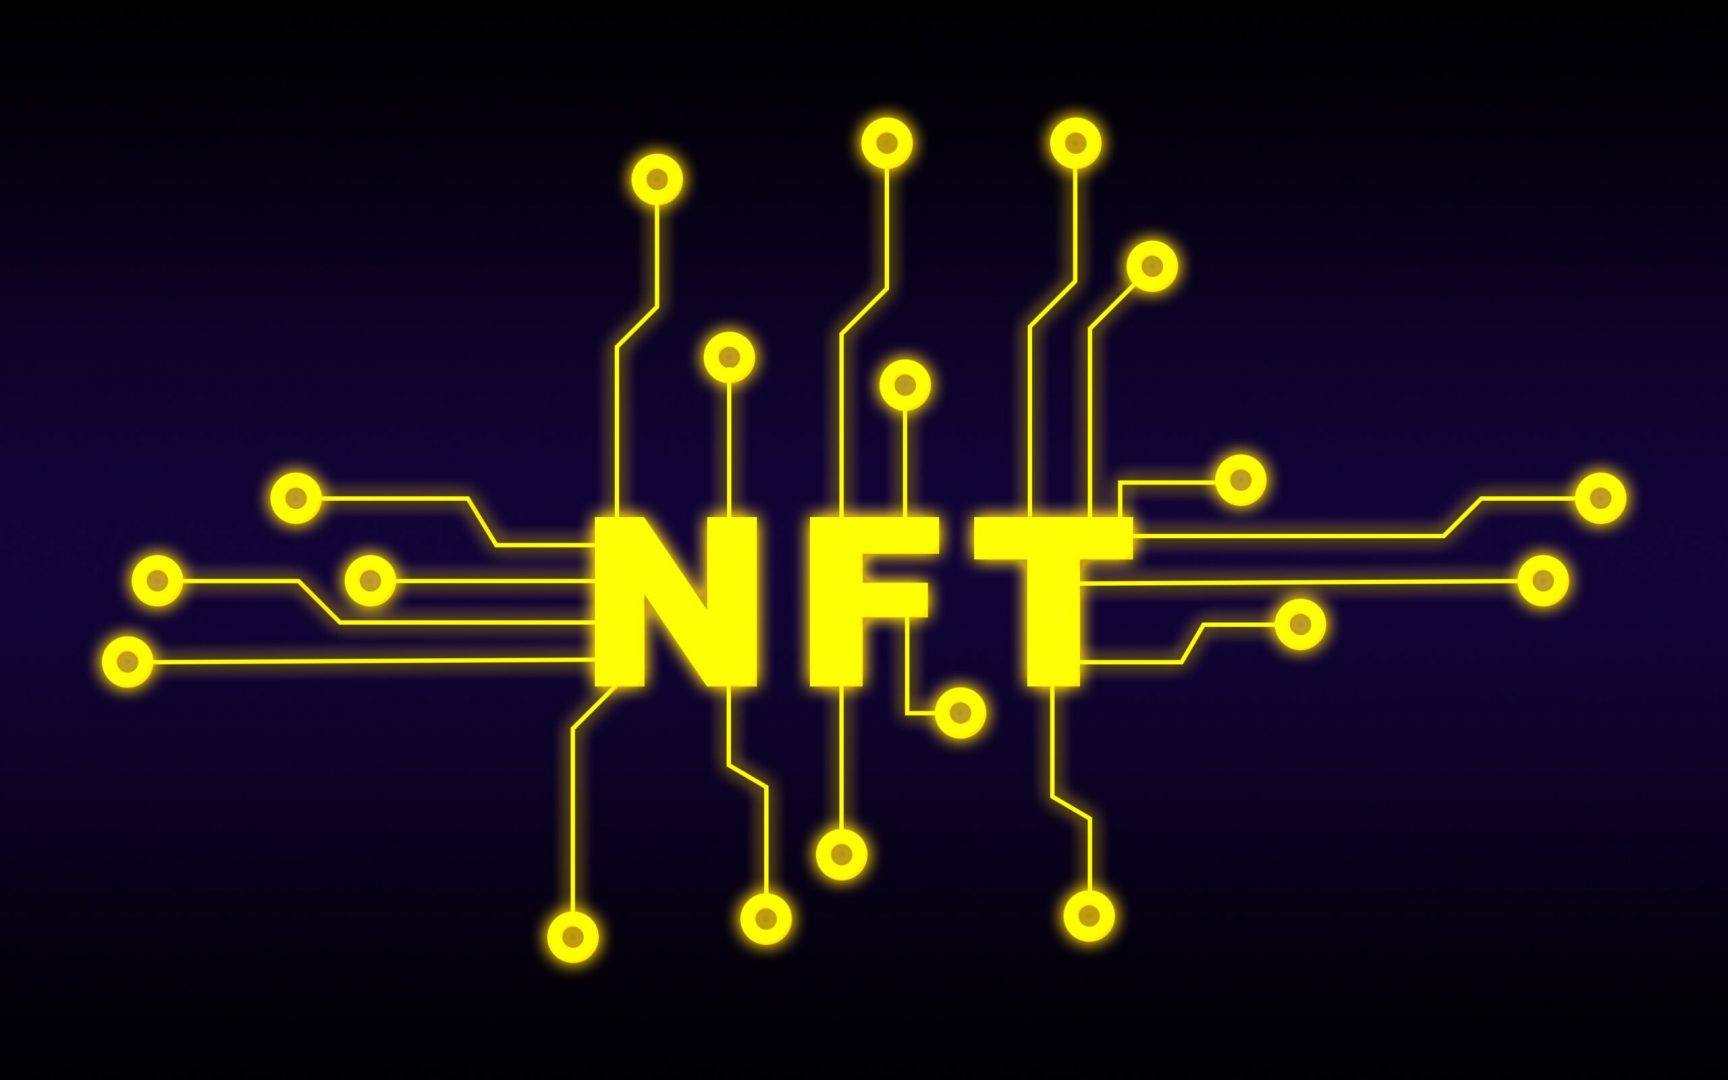 The future of NFTs